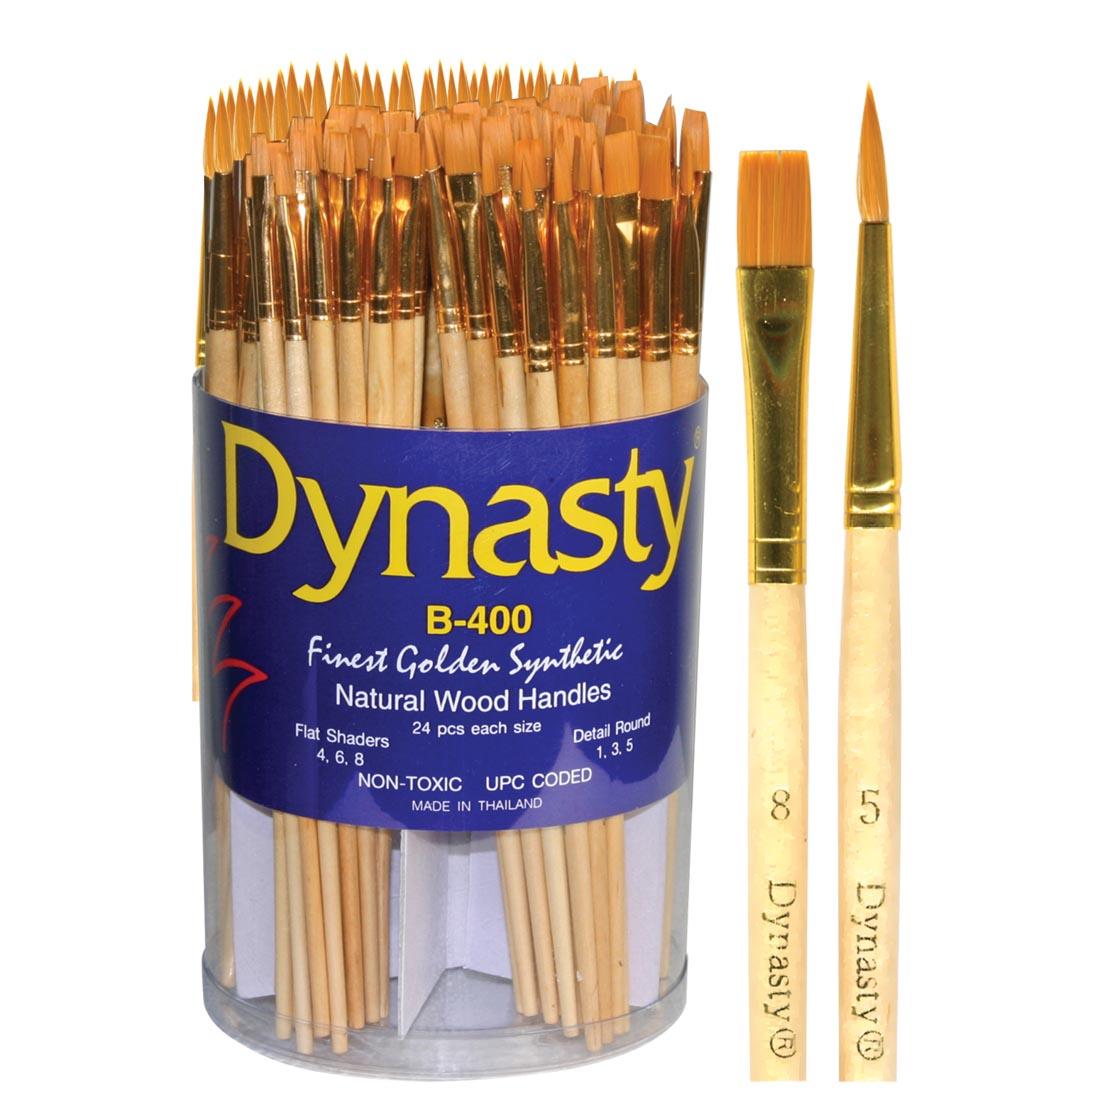 Dynasty Finest Golden Synthetic Brush Set in a Tub